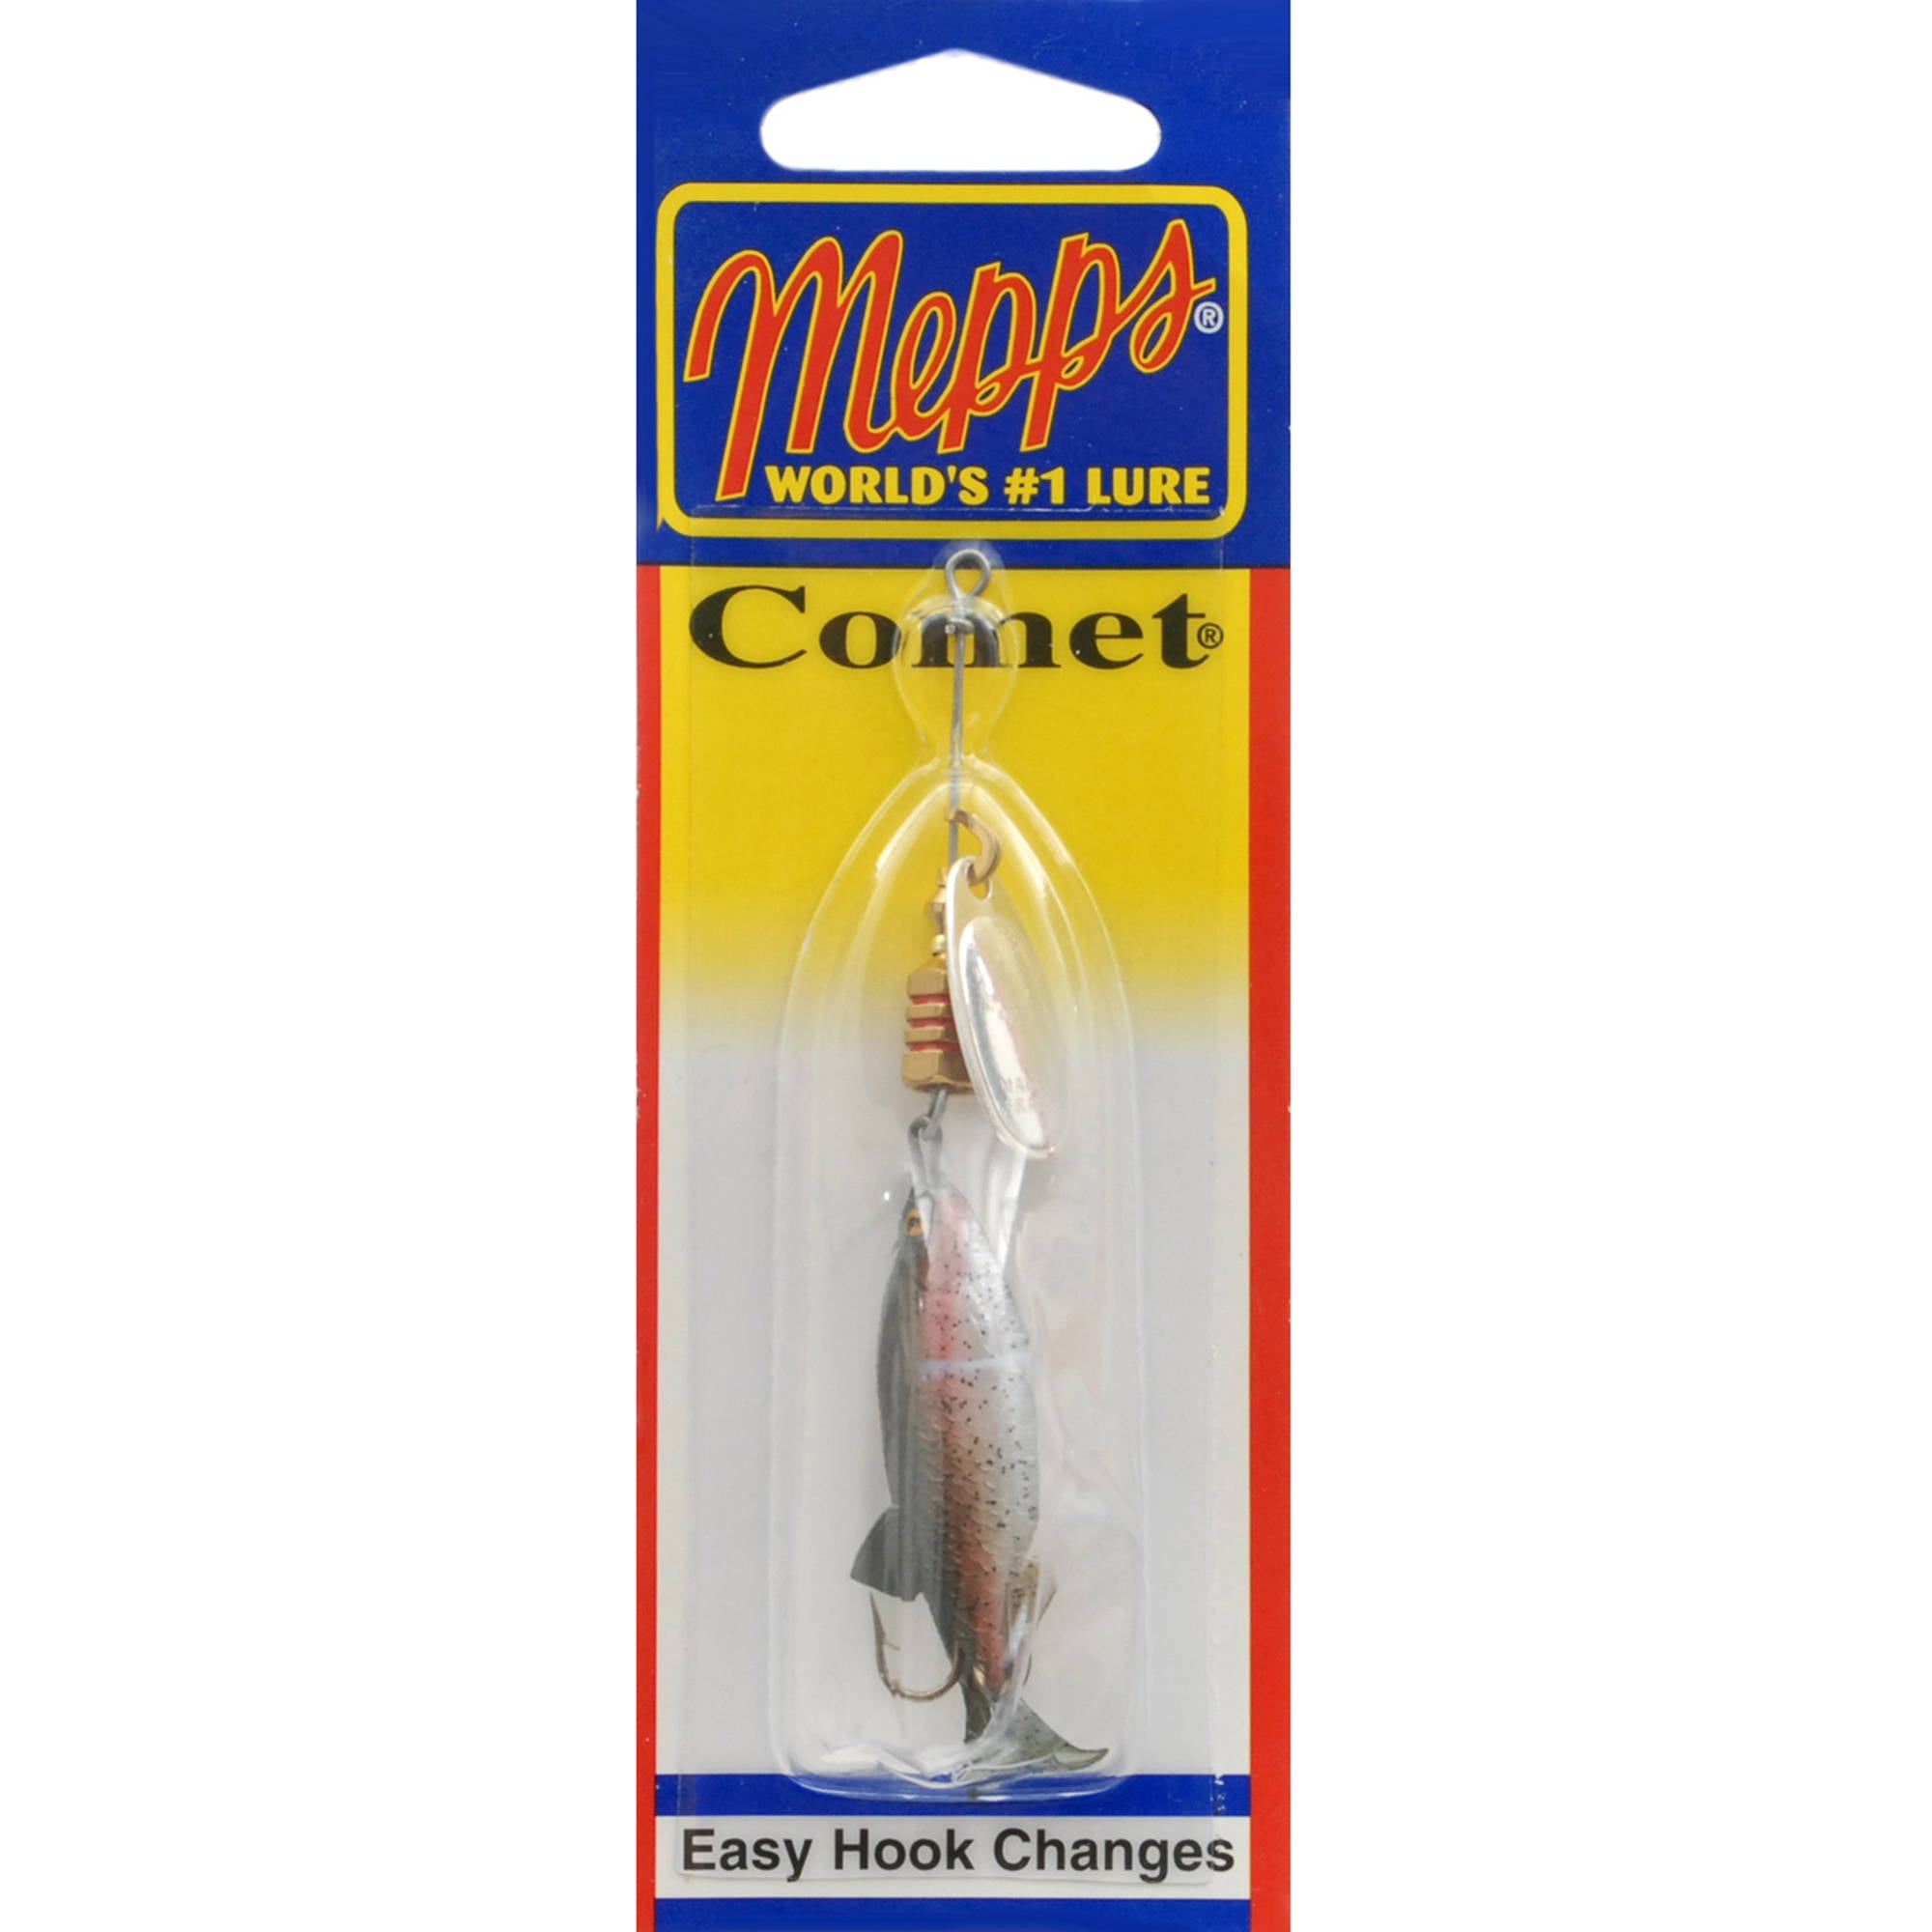 Mepps Com-s Silver Comet Minnow Bass Mater's Top 10 Fishing Spinner Lure 1/9 Oz for sale online 